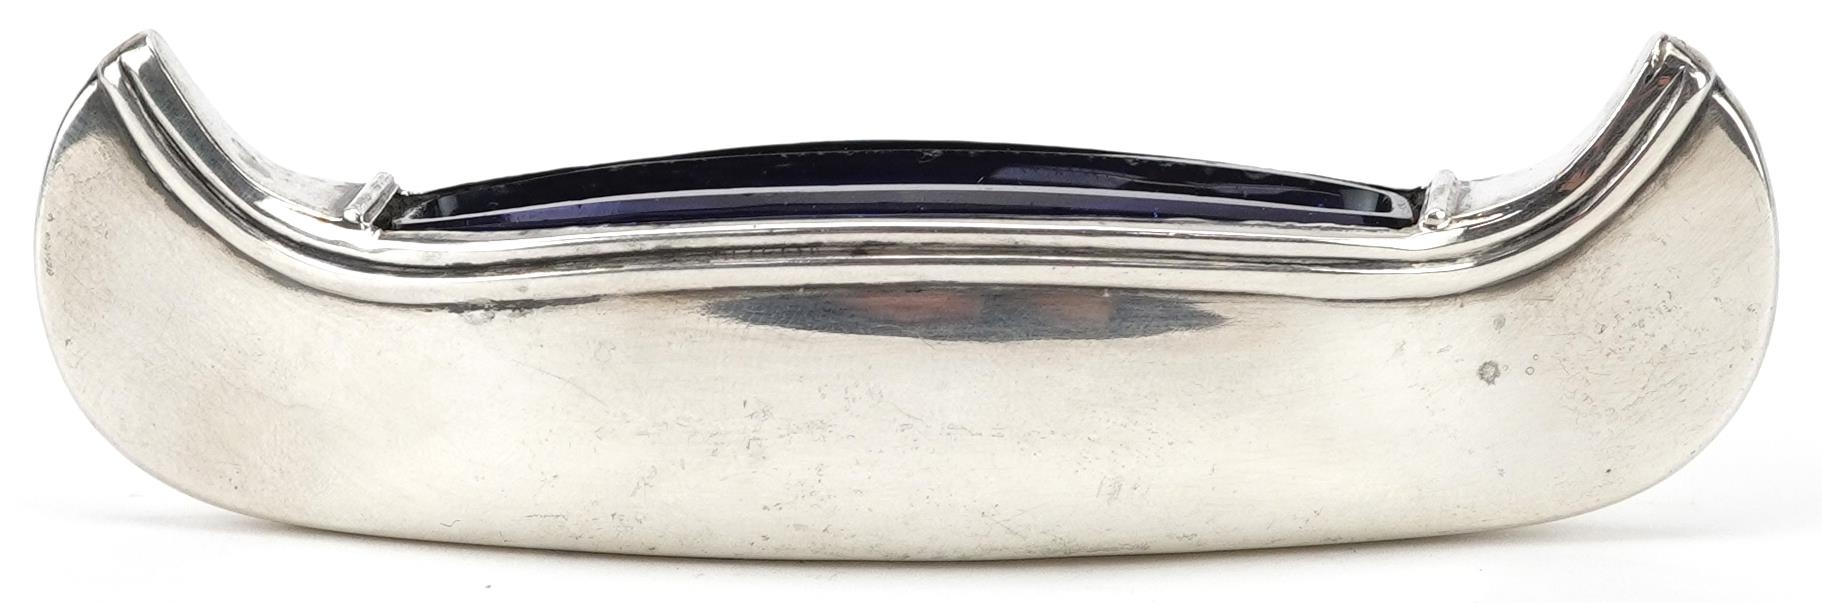 Adie & Lovekin Ltd, Edwardian silver open table salt in the form of a boat, with blue glass liner, - Image 2 of 5